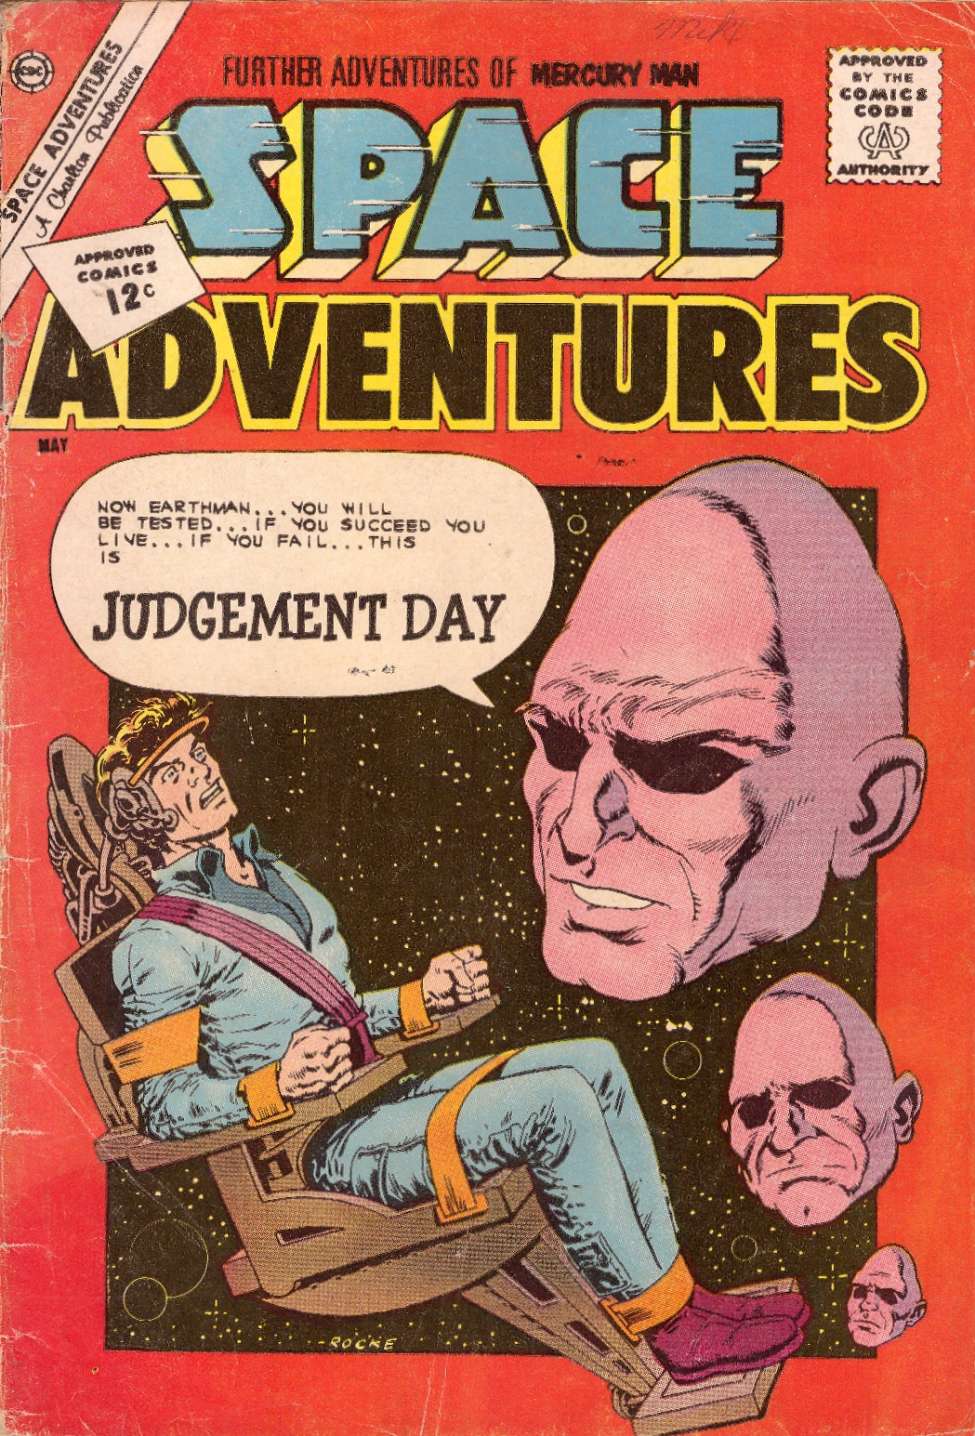 Book Cover For Space Adventures 45 - Version 1